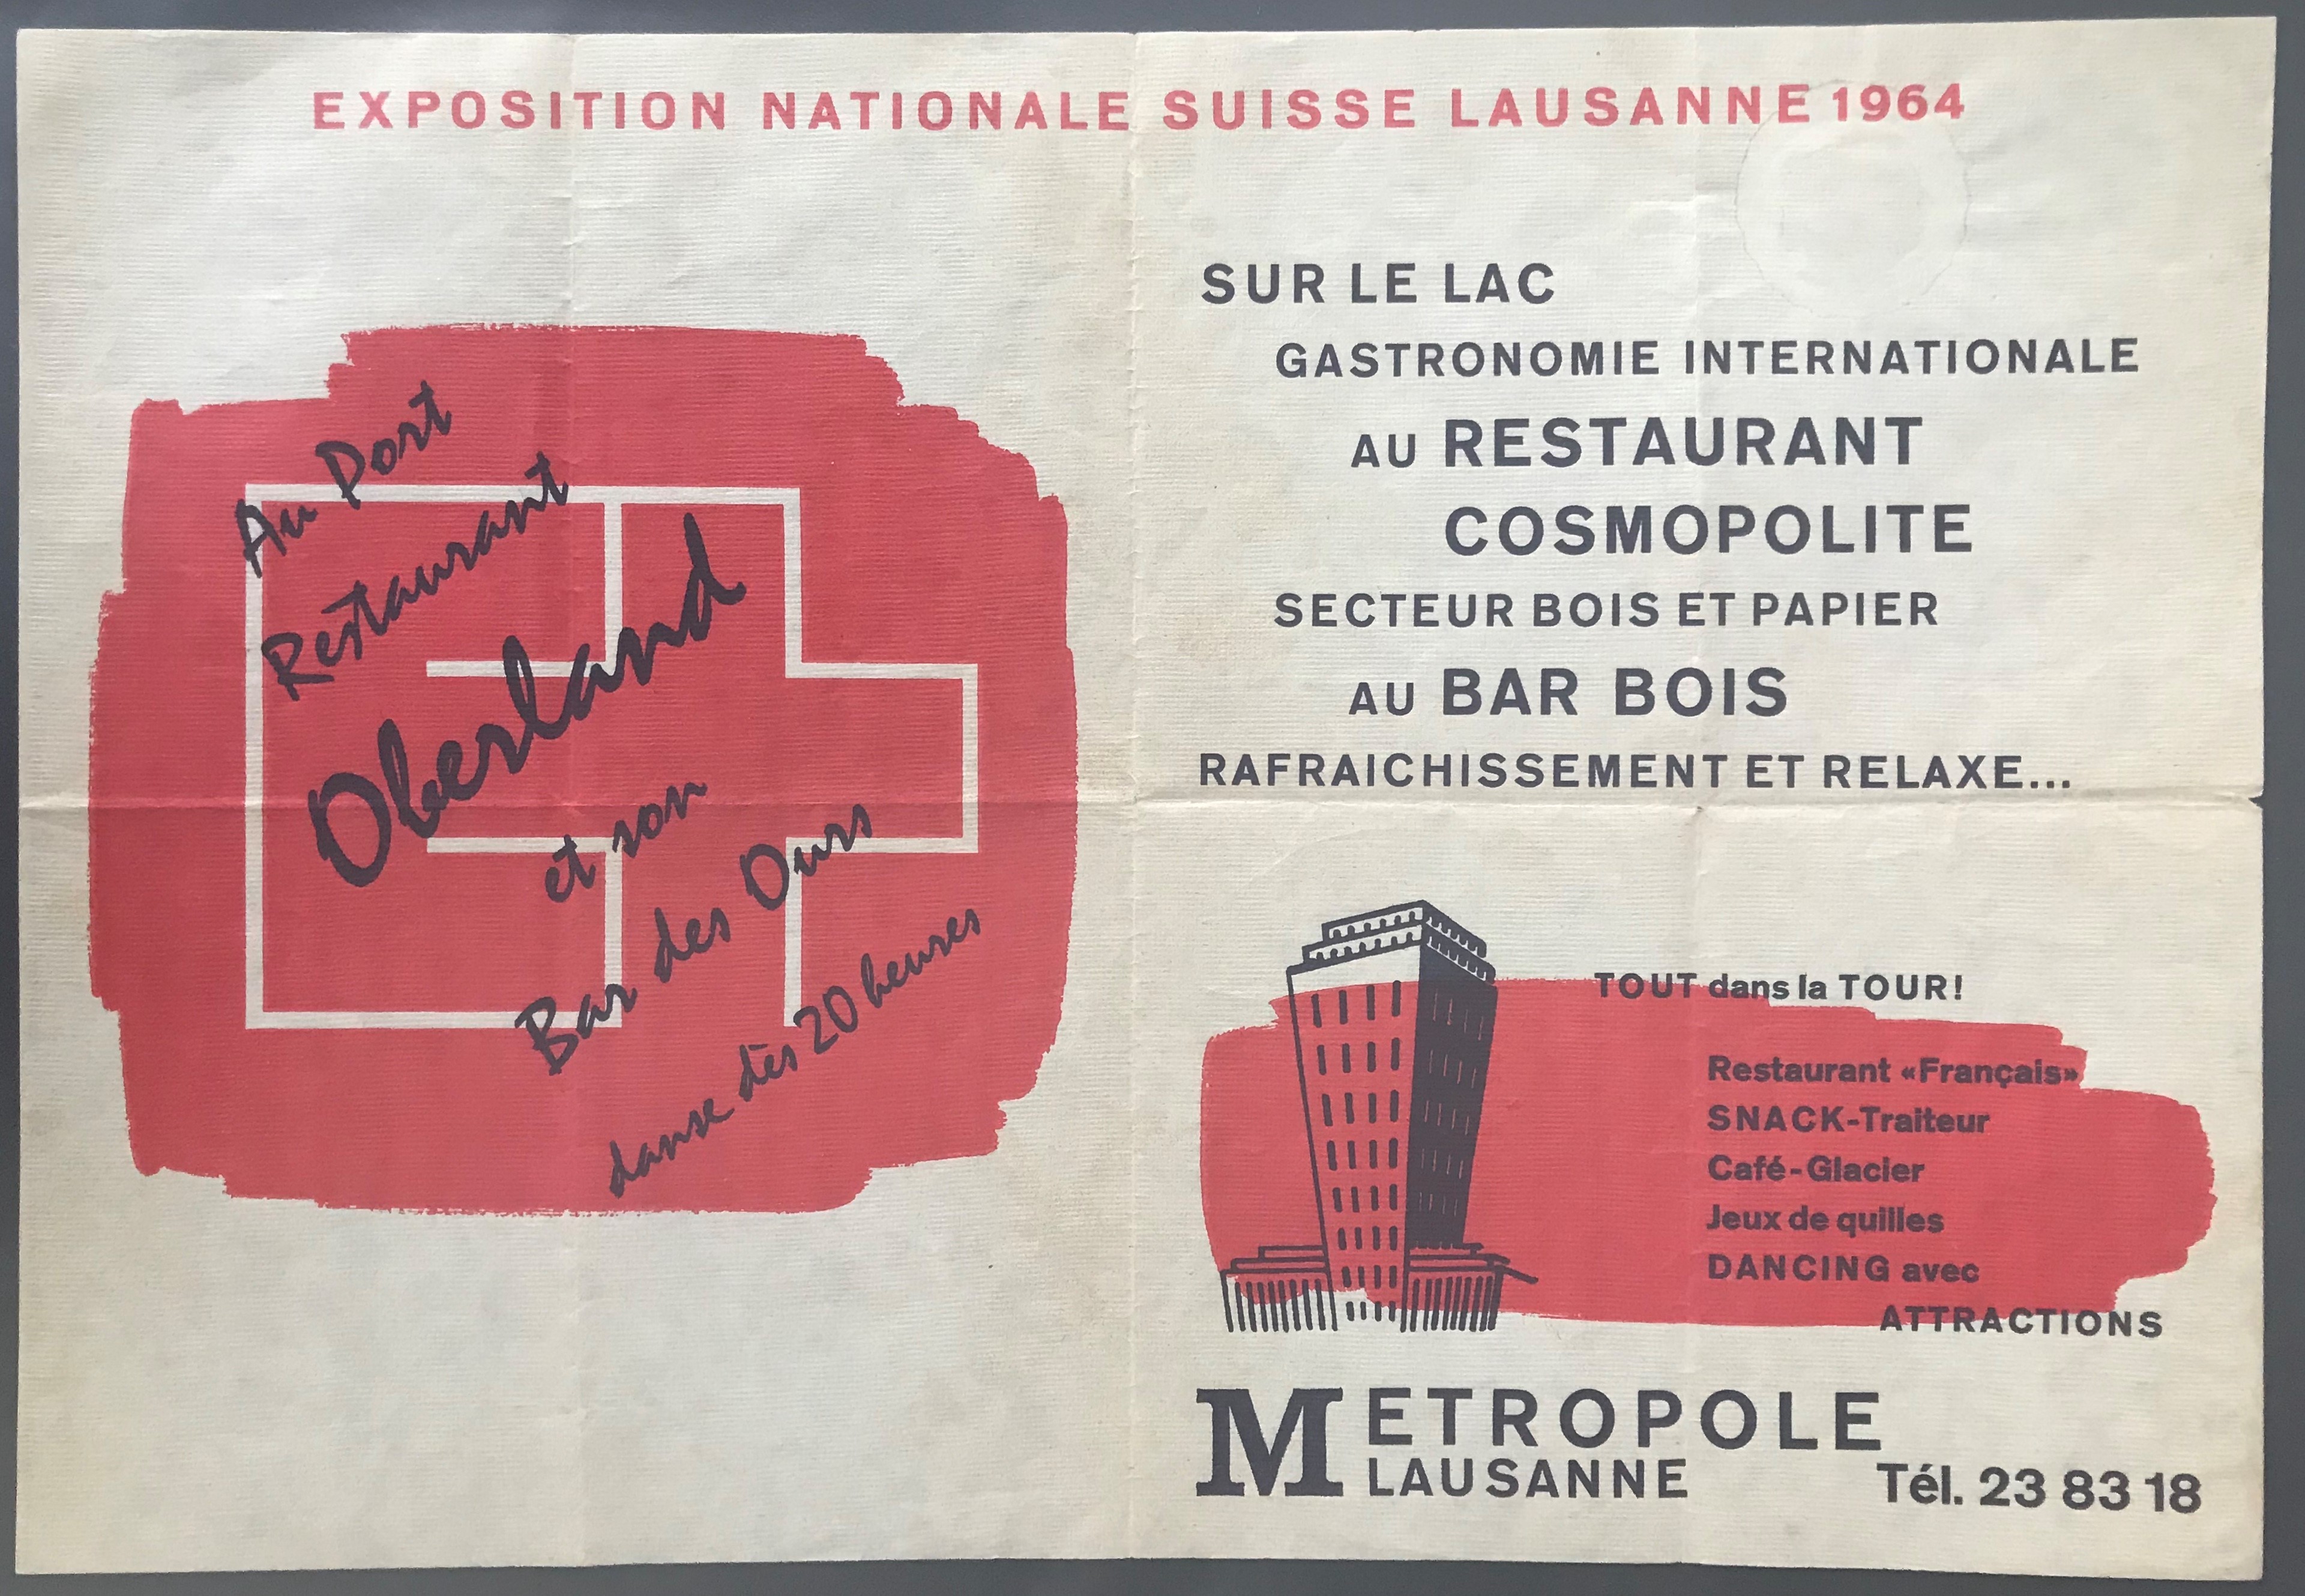 EXPOSITION NATIONALE SUISSE LAUSANNE 1964 POSTER EXPO 64